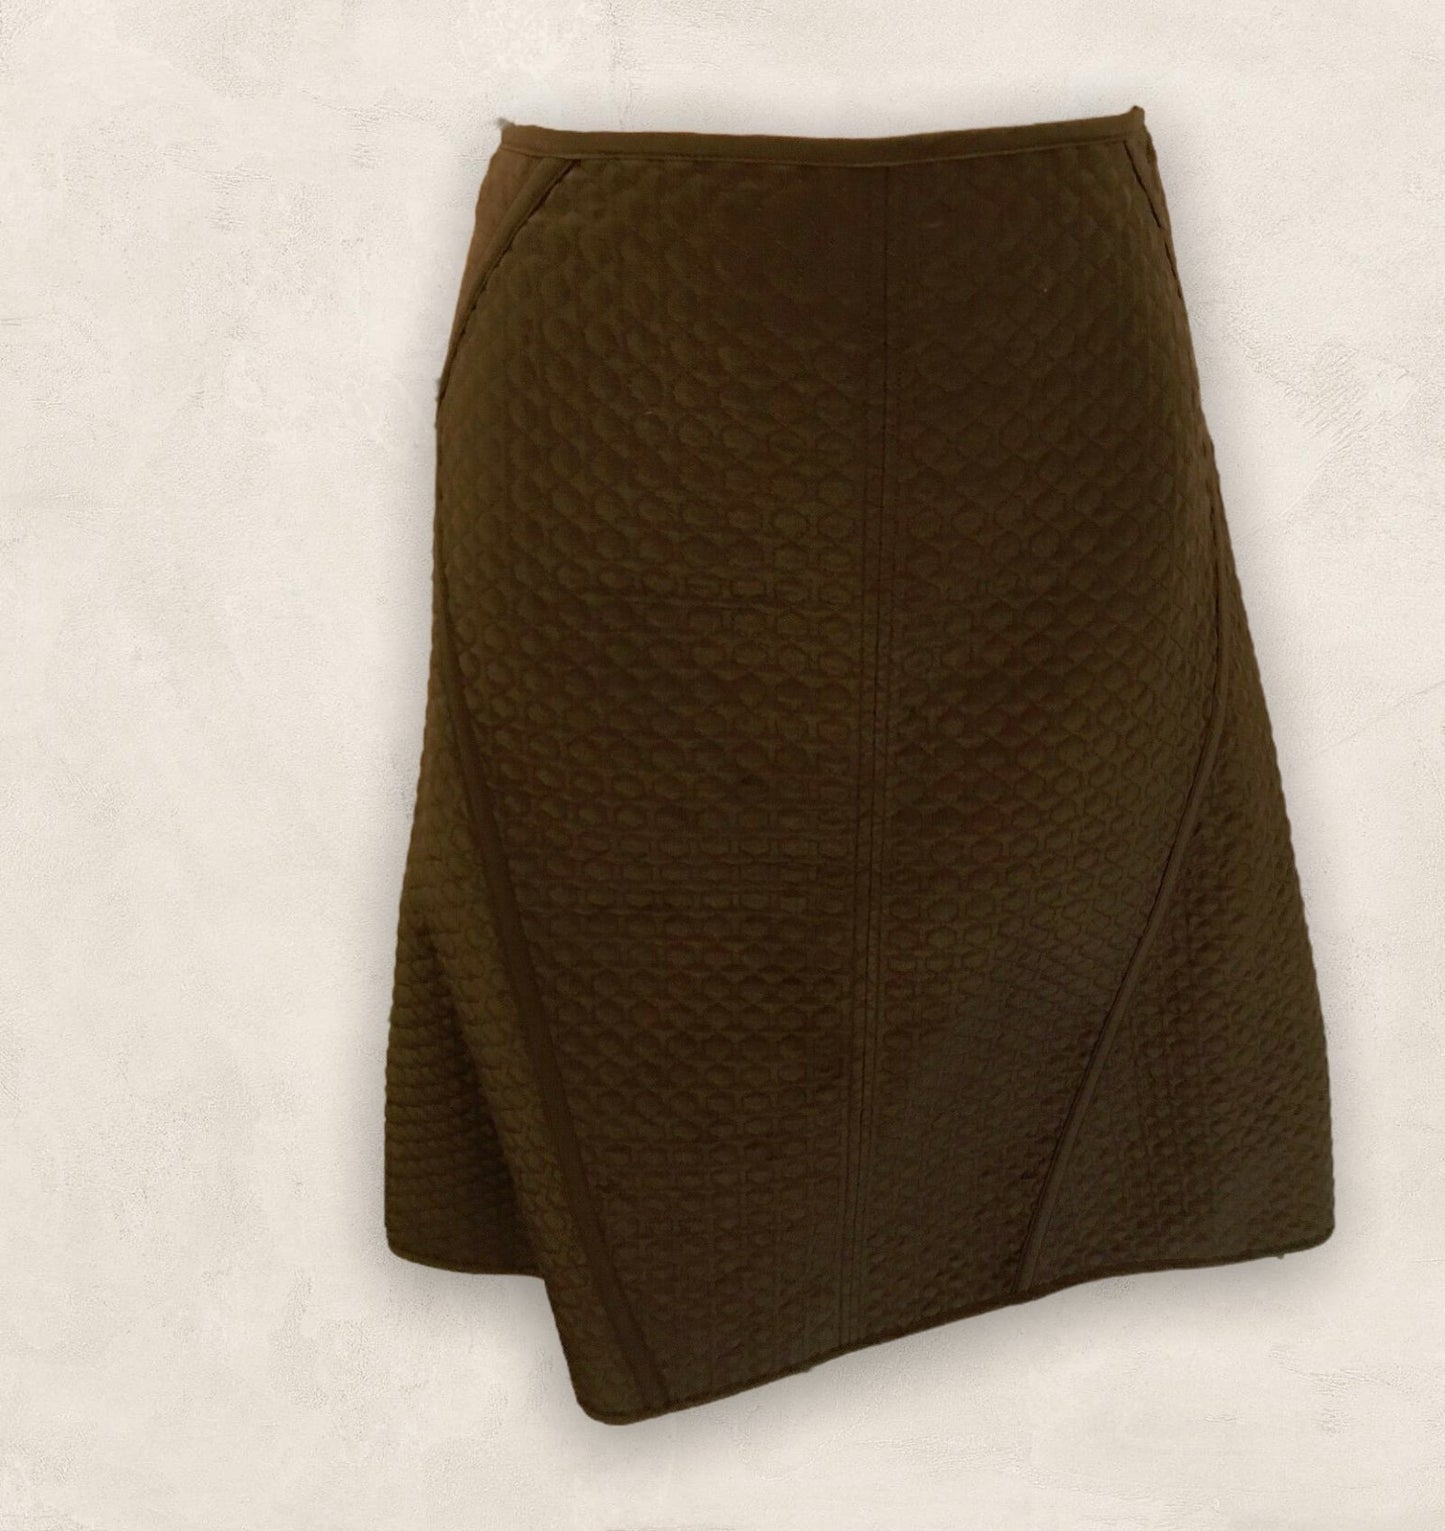 DKNY Brown Quilted A-line Skirt UK 8 US 4 EU 36 Timeless Fashions